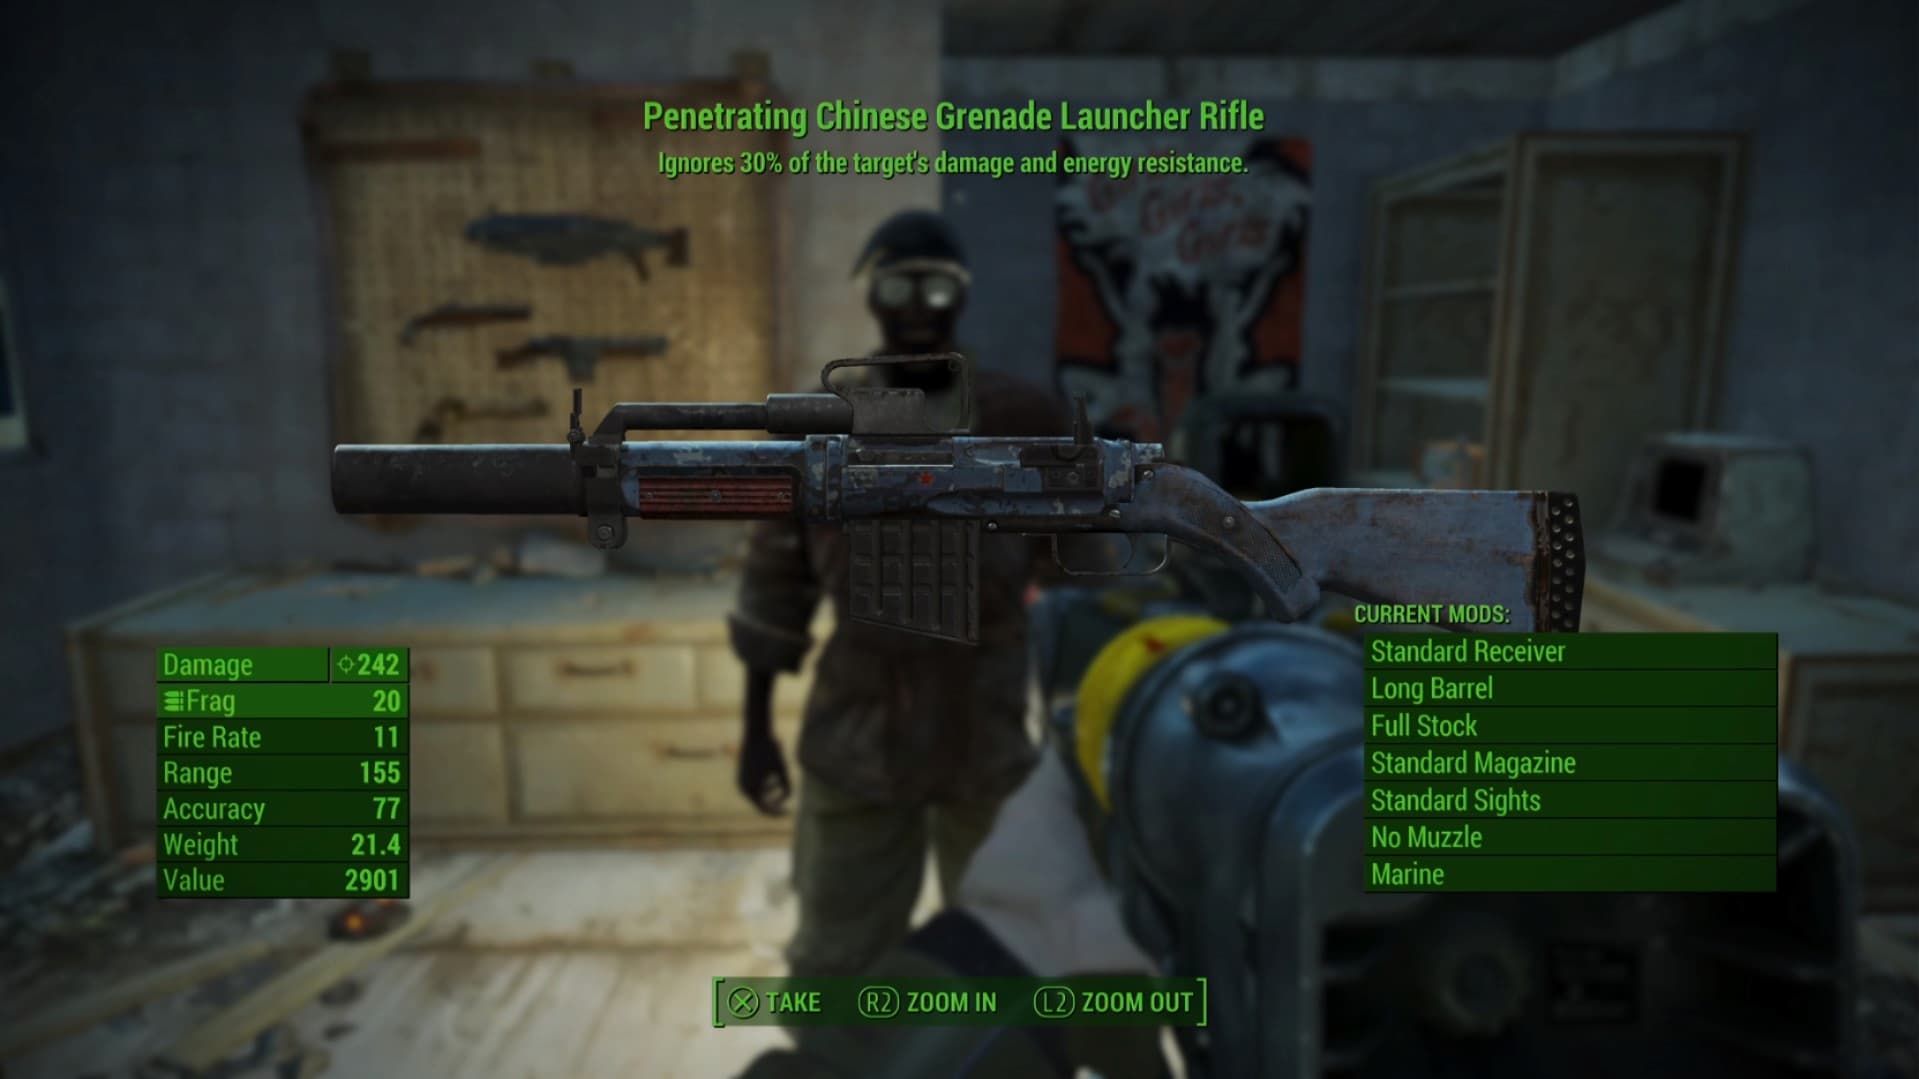 The Penetrant Chinese Grenade Launcher Rifle weapon you get as a reward in Fallout 4's When Pigs Fly quest